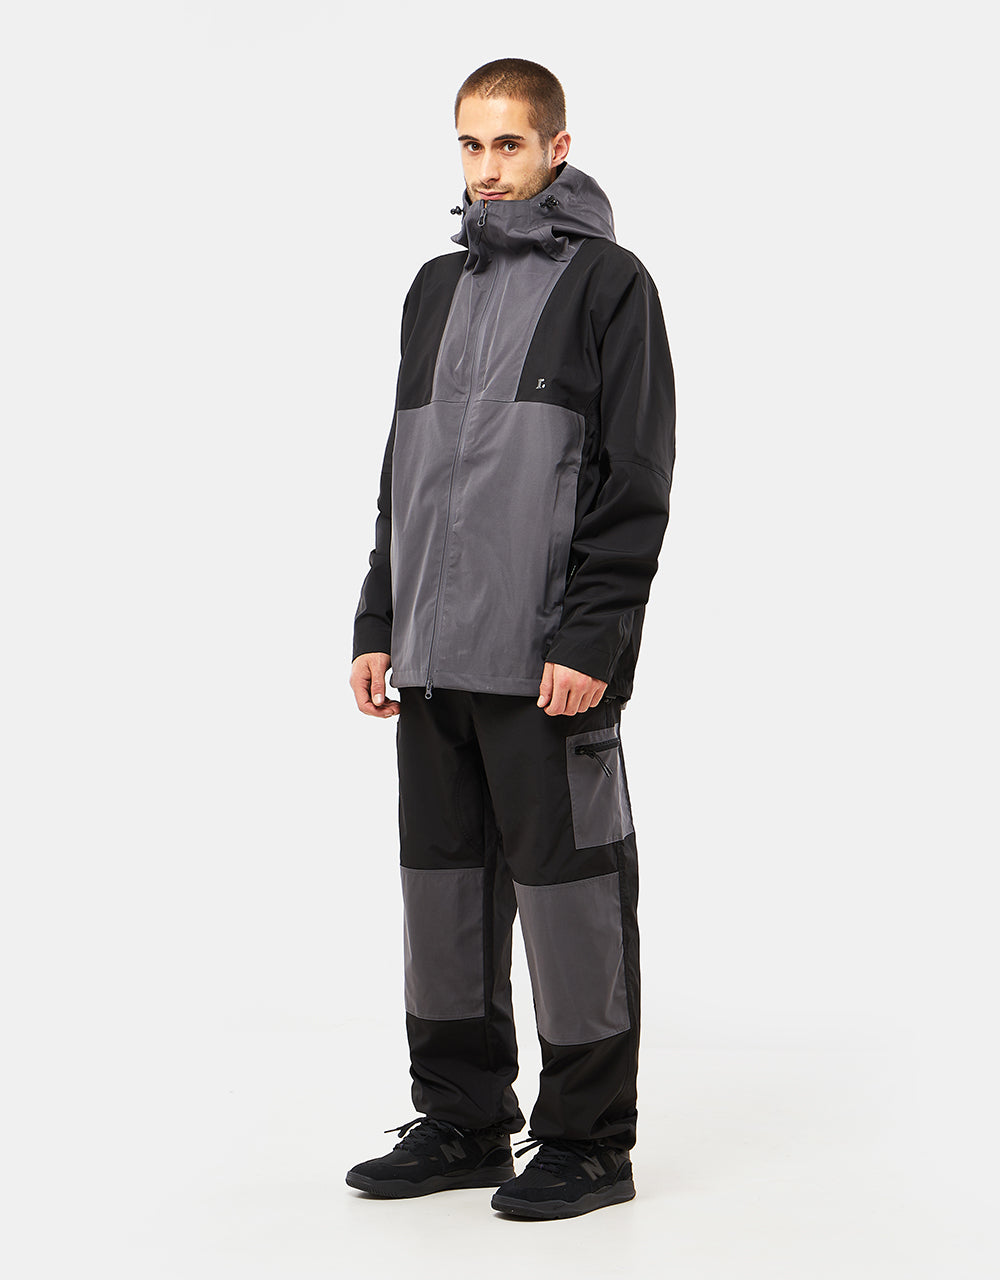 Route One Explorer Jacket - Charcoal